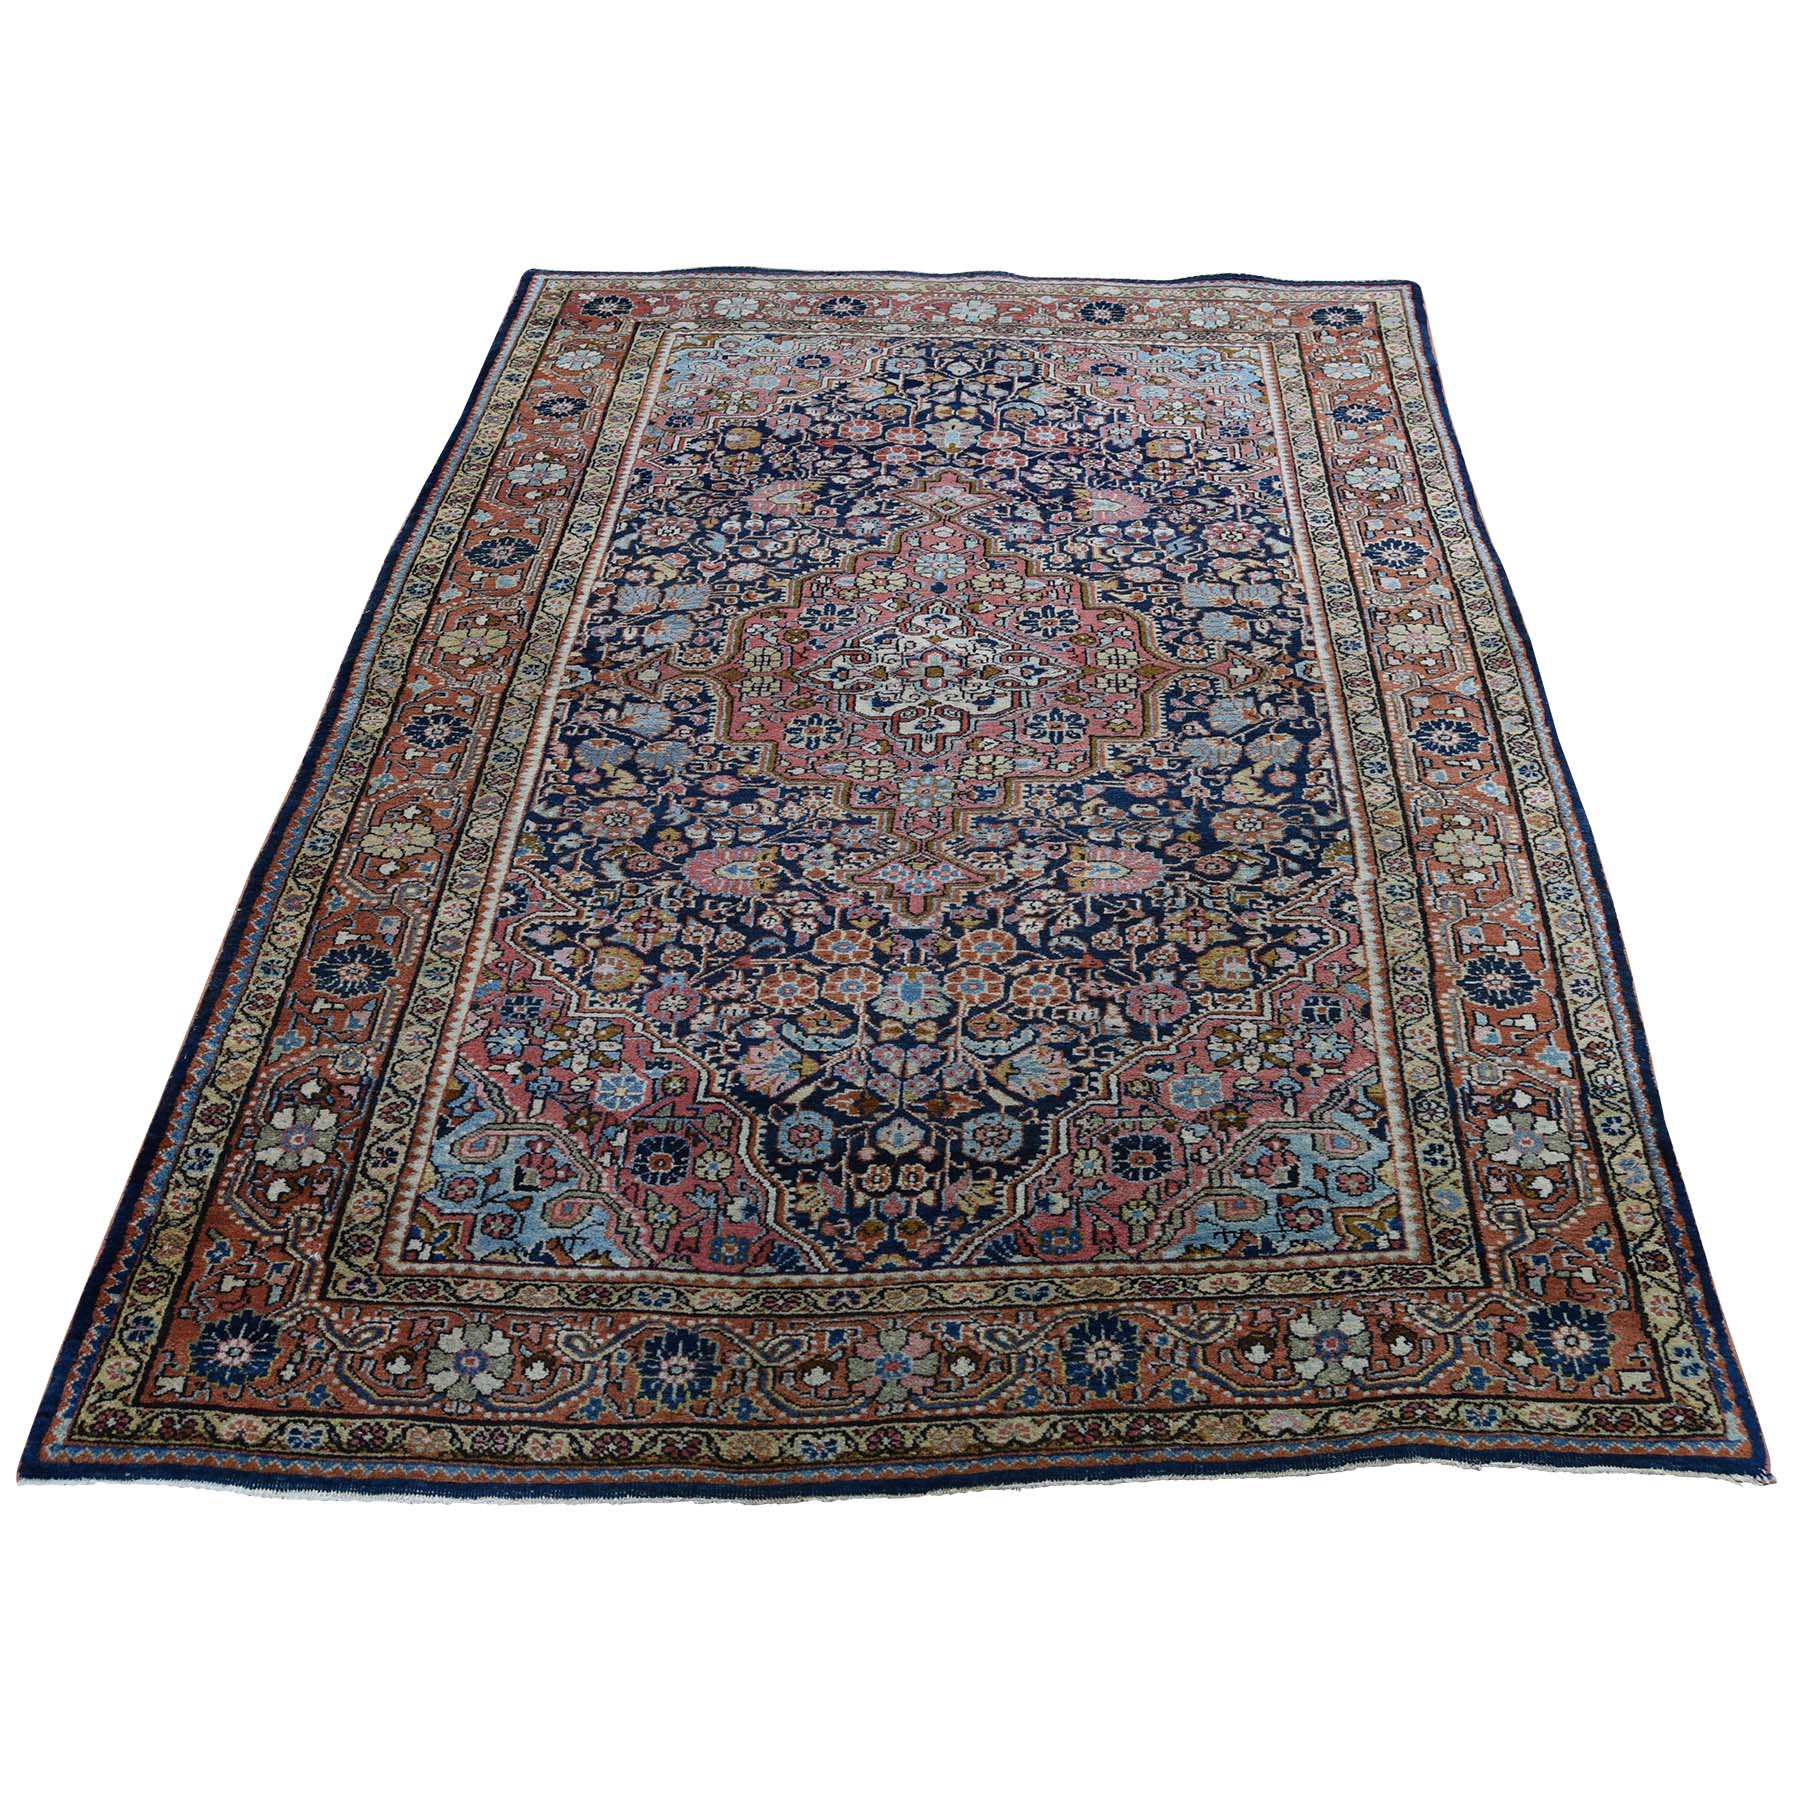 4'4"x6'8" Antique Persian Josan Sarouk Full Pile Good Condition Pure Wool Hand-knotted Oriental Rug 